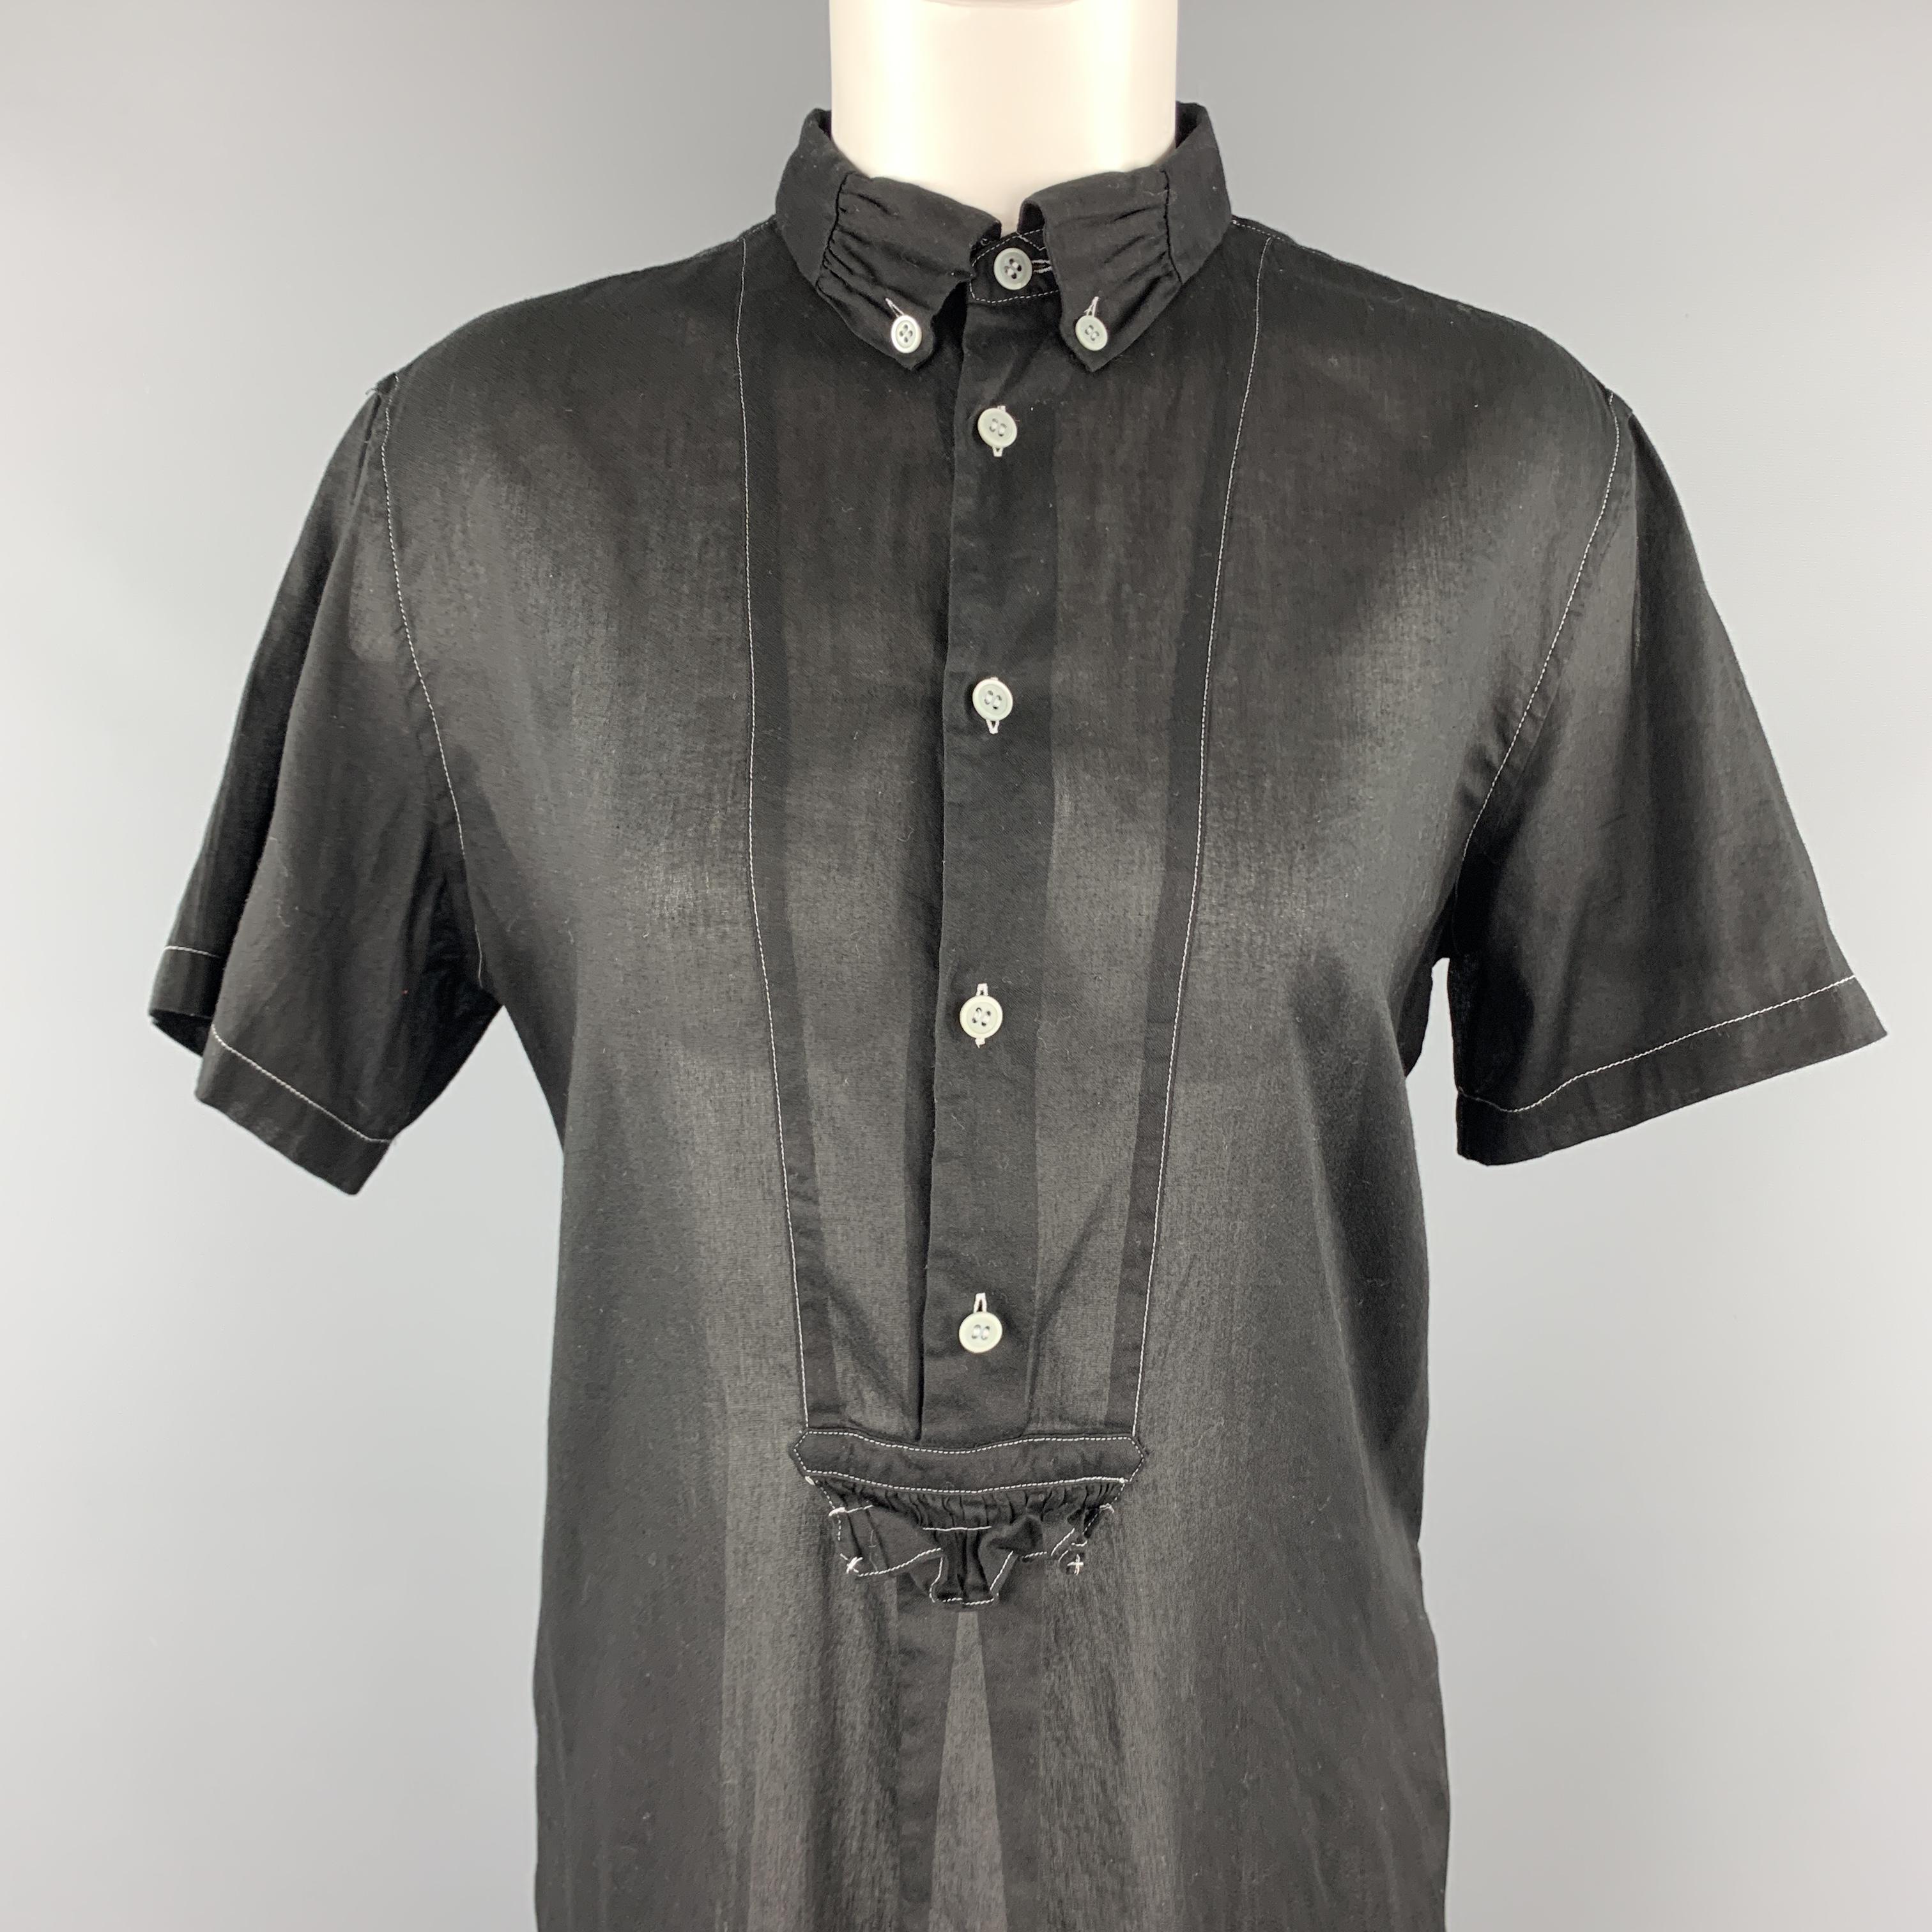 COMME des GARCONS TRICOT shirt dress comes in sheer black cotton with an oversized A line silhouette, ruffle detailed button down collar, and contrast stitching throughout. Made in Japan.

Excellent Pre-Owned Condition.
Marked: M  AD